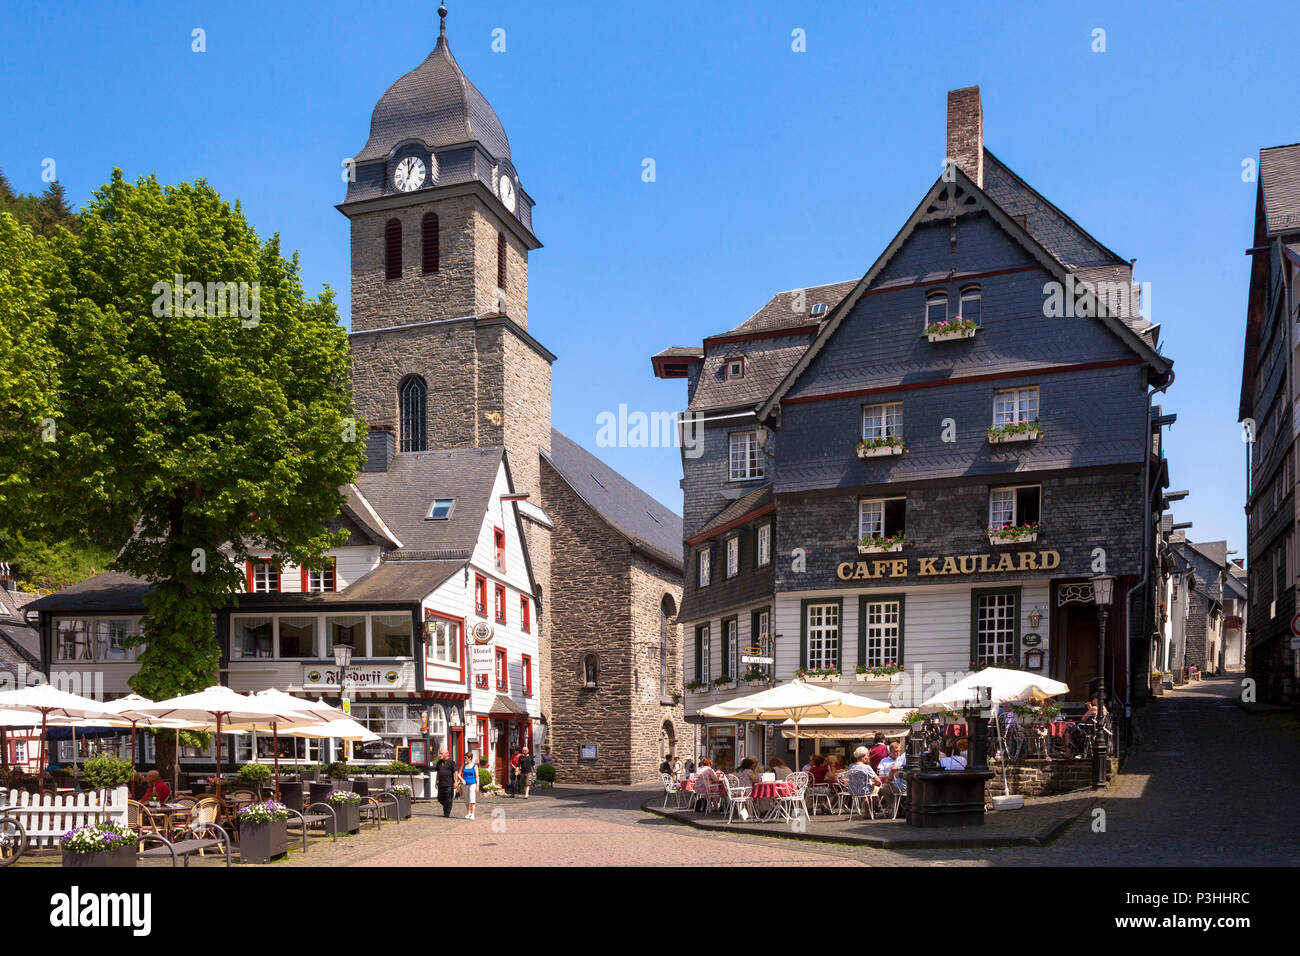 Germany, Eifel region, the city of Monschau, the Au church Sankt Maria Empfaengnis and the cafe Kaulard at the market square in the historic town.  De Stock Photo